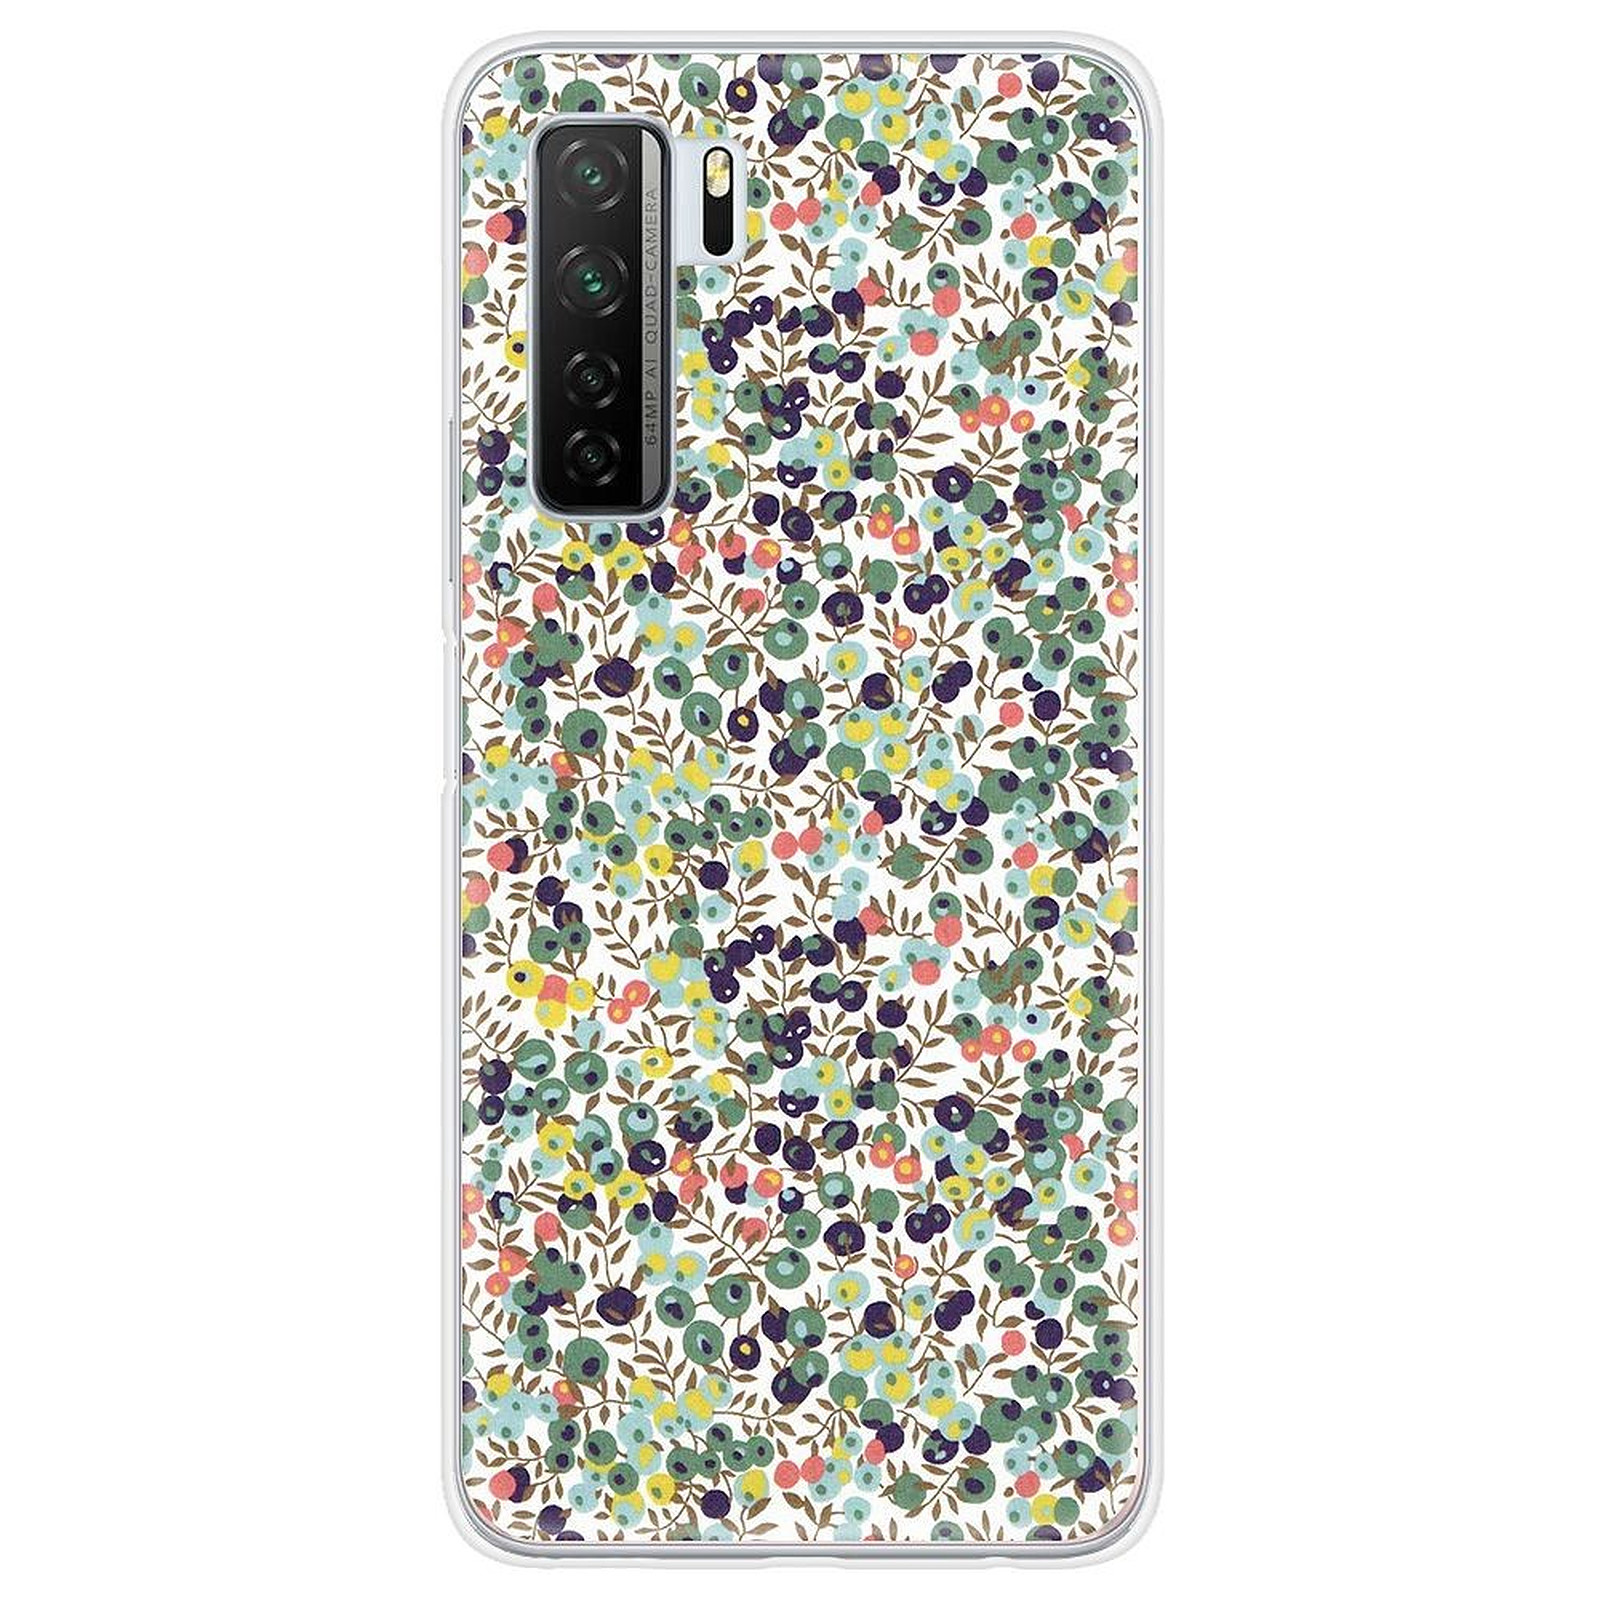 1001 Coques Coque silicone gel Huawei P40 Lite 5G motif Liberty Wiltshire Vert - Coque telephone 1001Coques